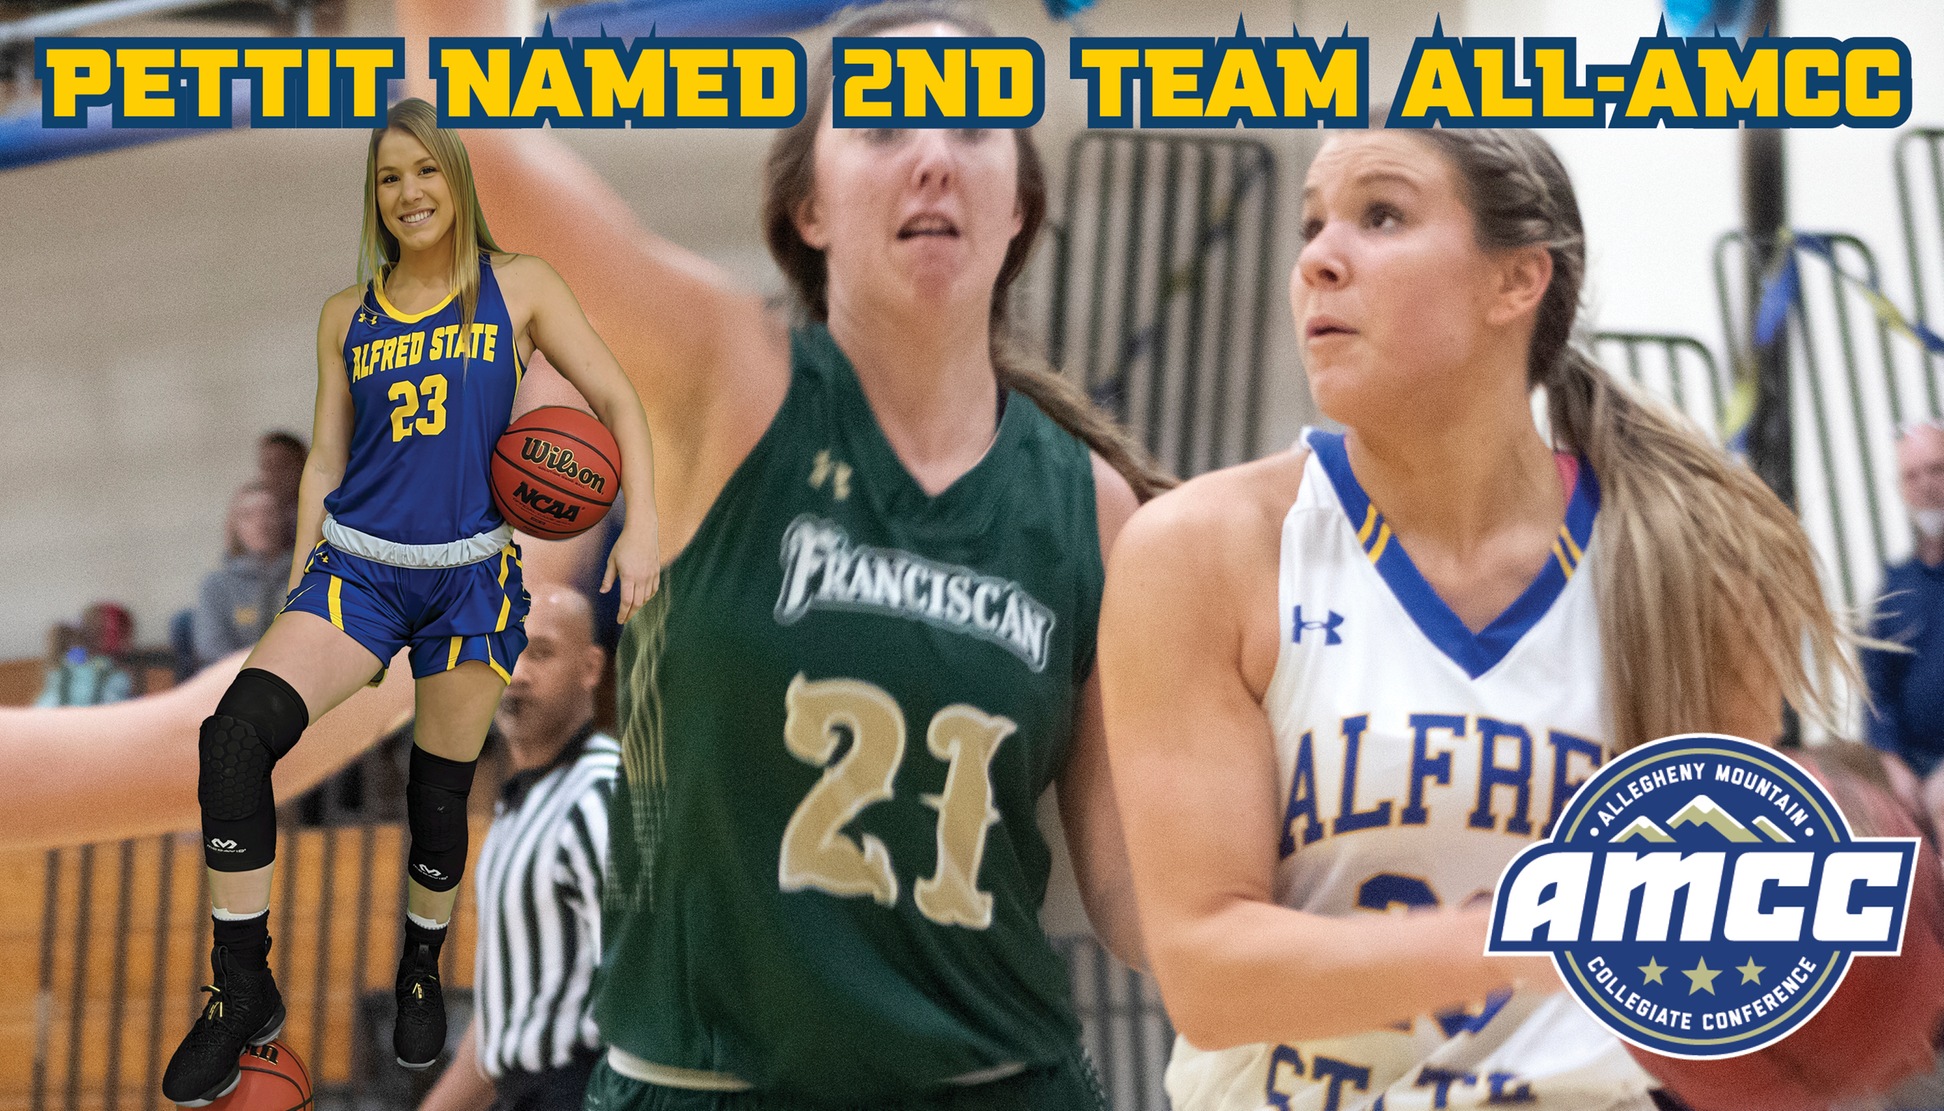 Pettit Named 2nd team All-AMCC